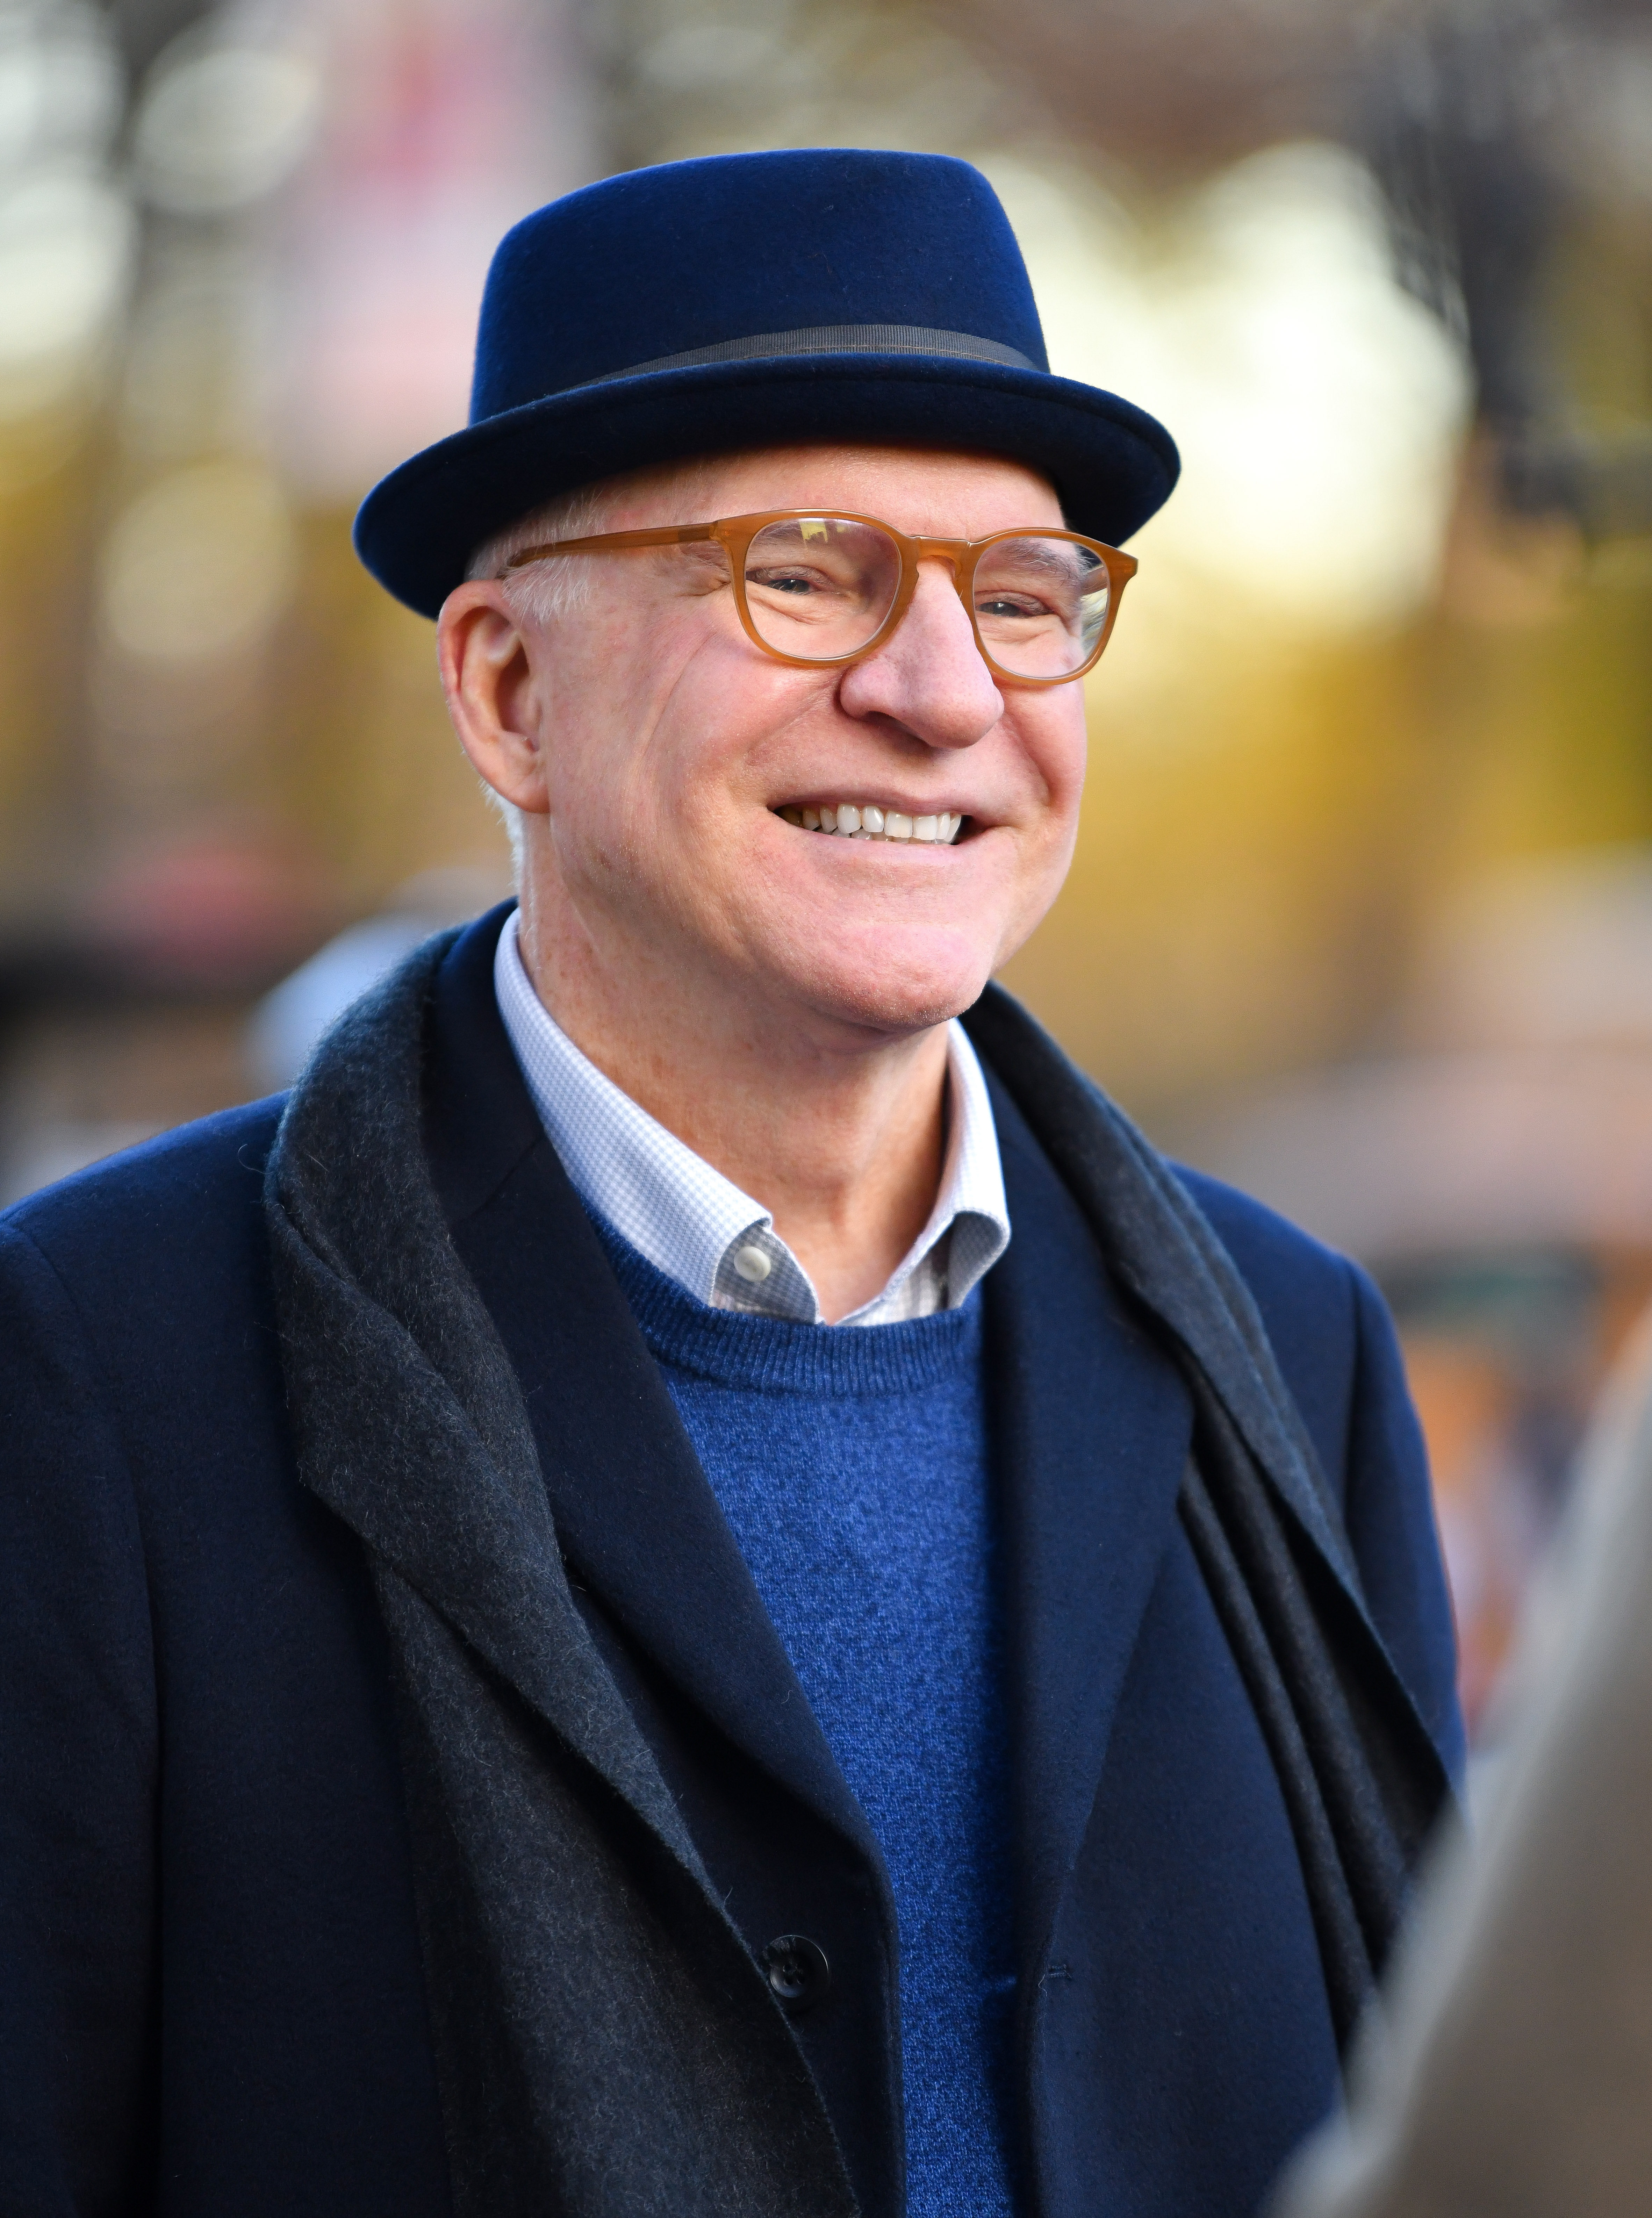 Steve Martin seen on the set of "Only Murders in the Building" on the Upper West Side in New York City, on December 3, 2020. | Source: Getty Images